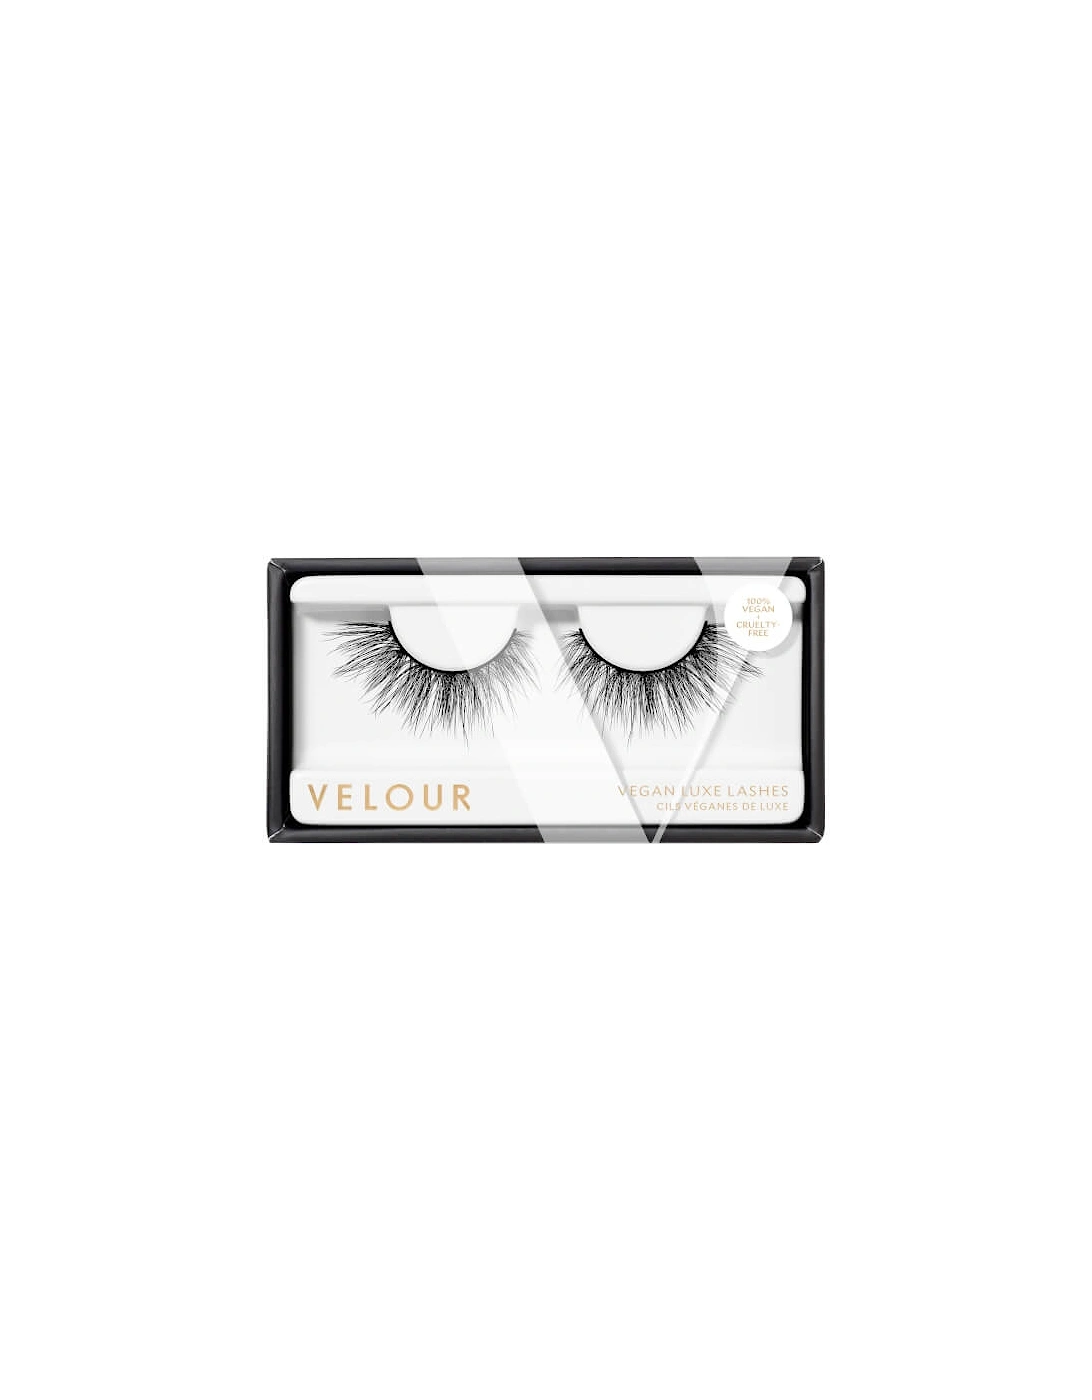 Velour Vegan Luxe Sinful Lashes, 2 of 1